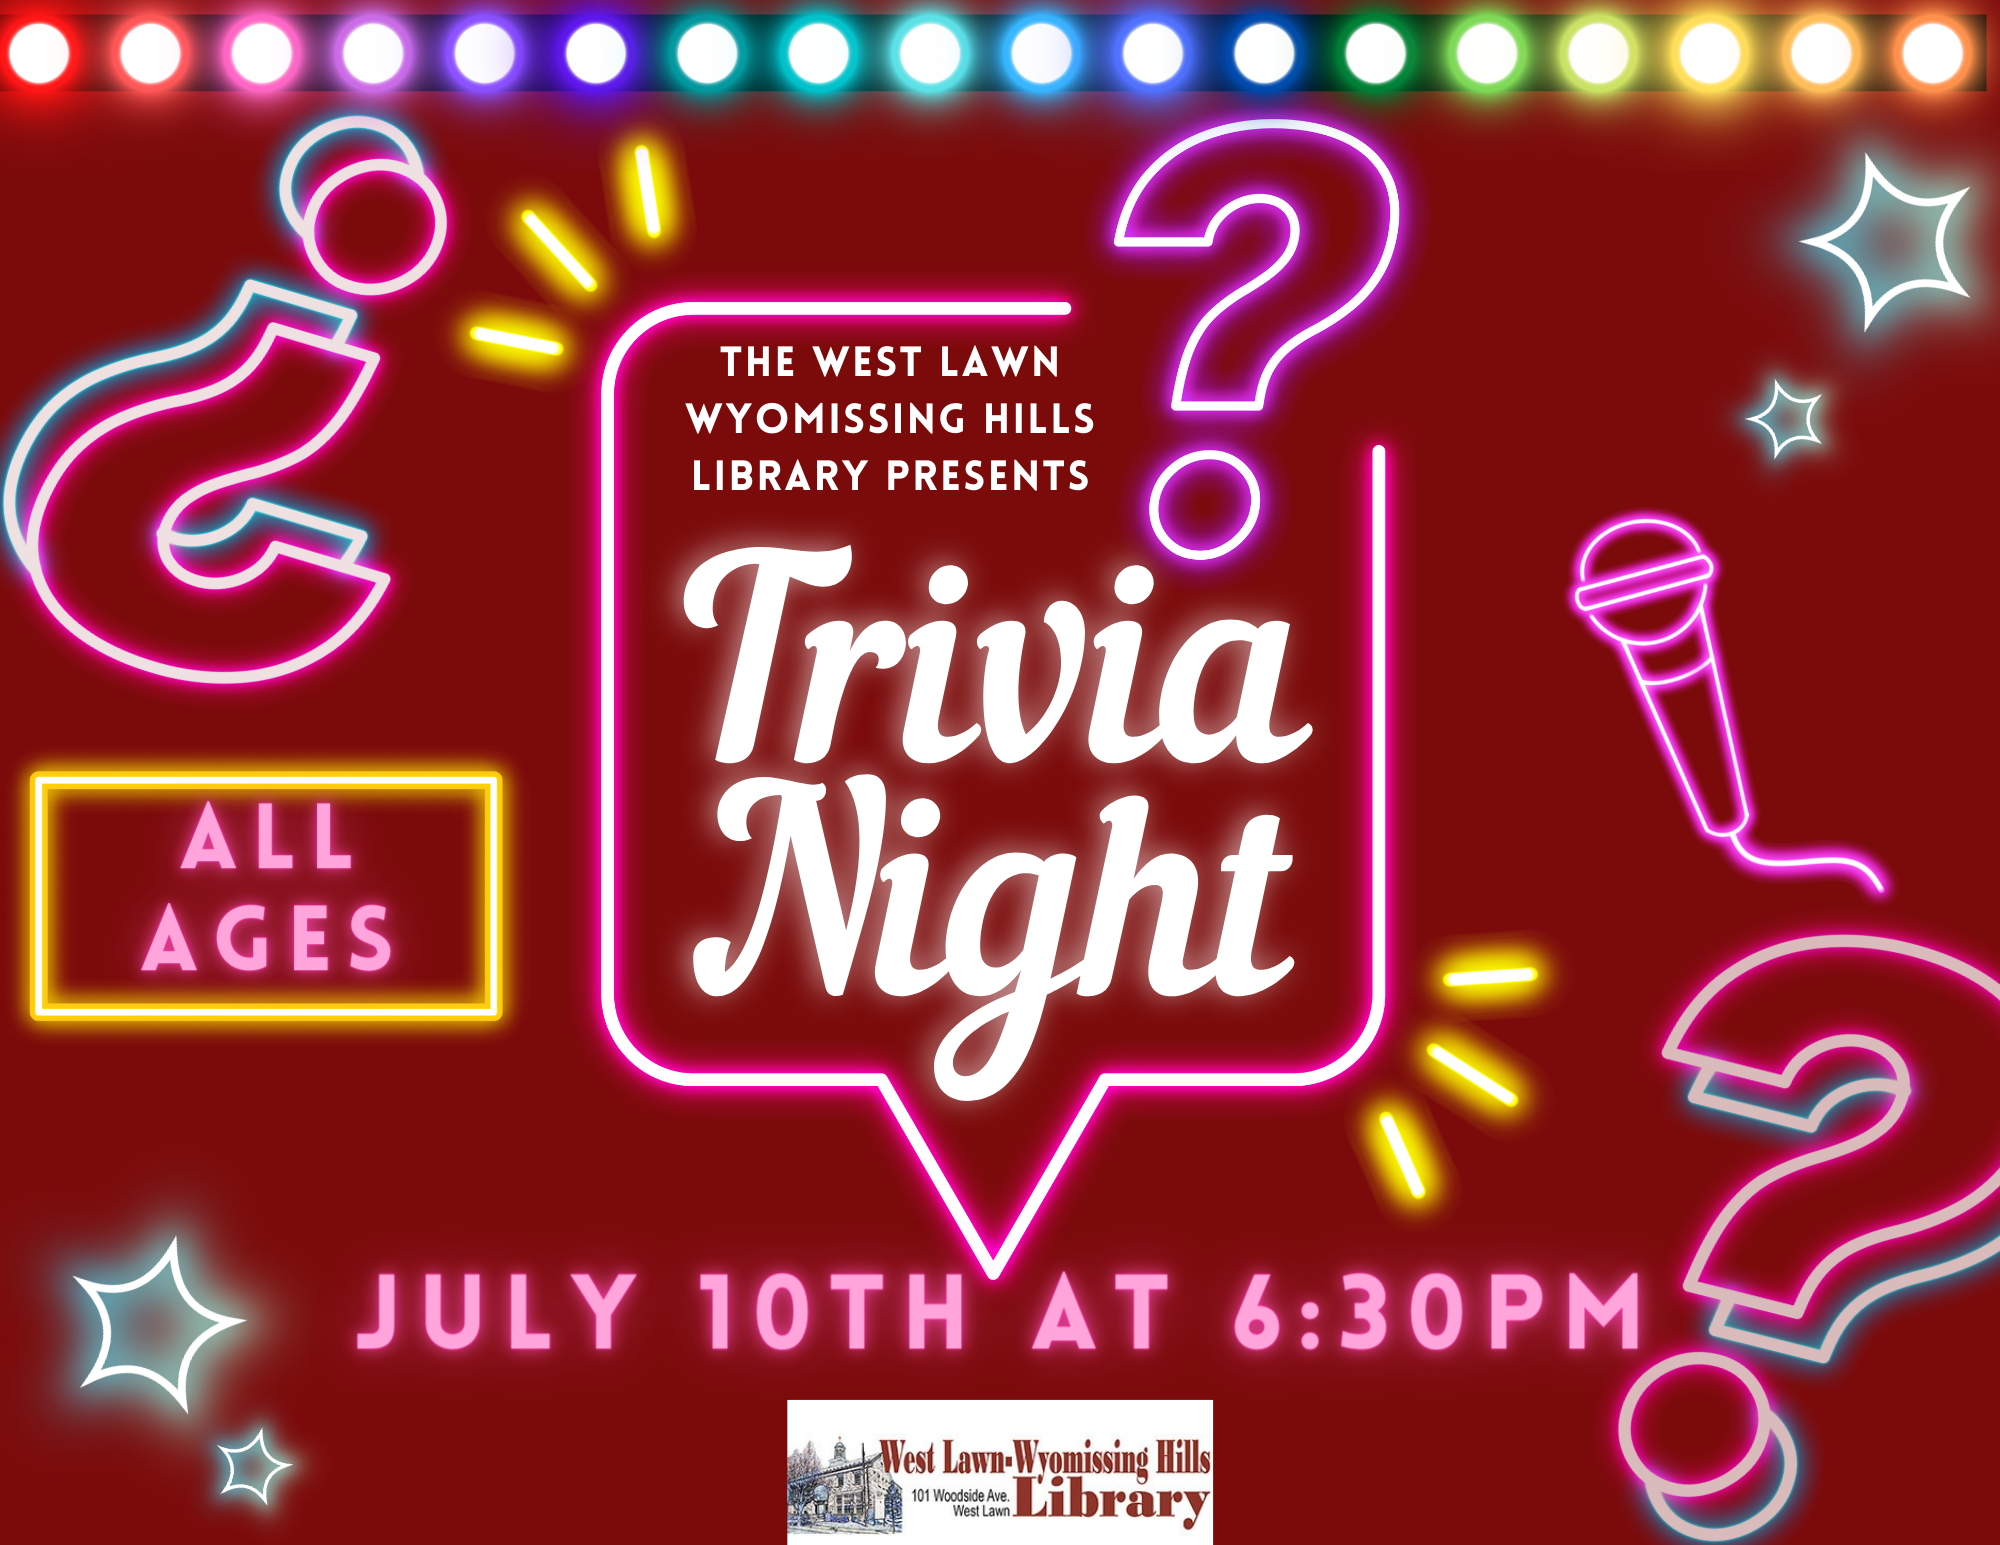 Wednesday, July 10th at 6:30PM   Join us for a night of Family Friendly trivia! All Ages are welcome!  No registration required! Free!  The winning team will receive a small prize from the library!